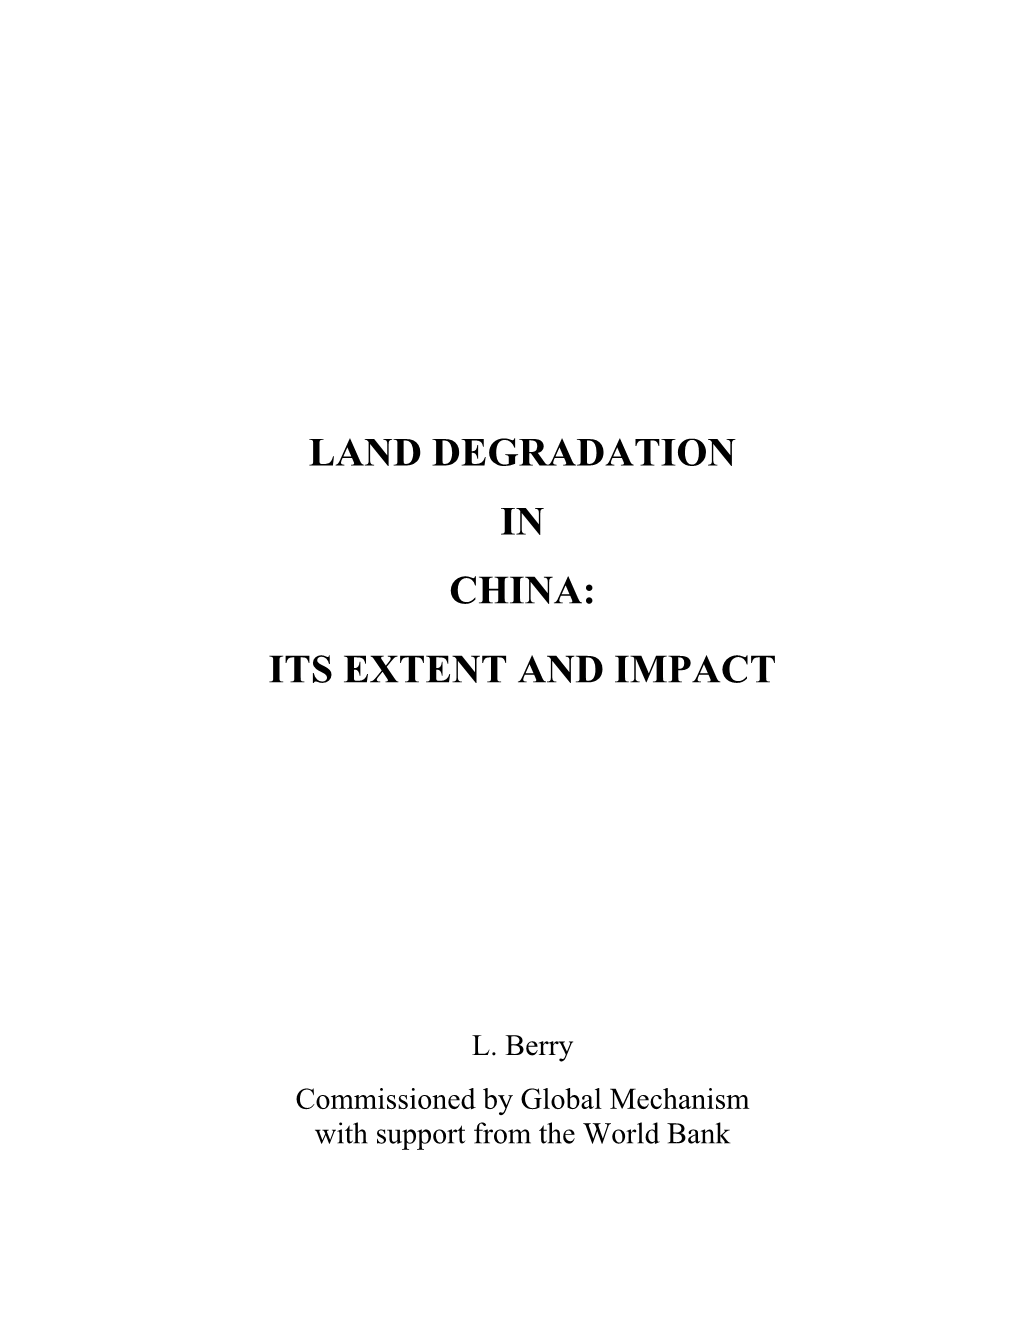 Land Degradation in China: Its Extent and Impact